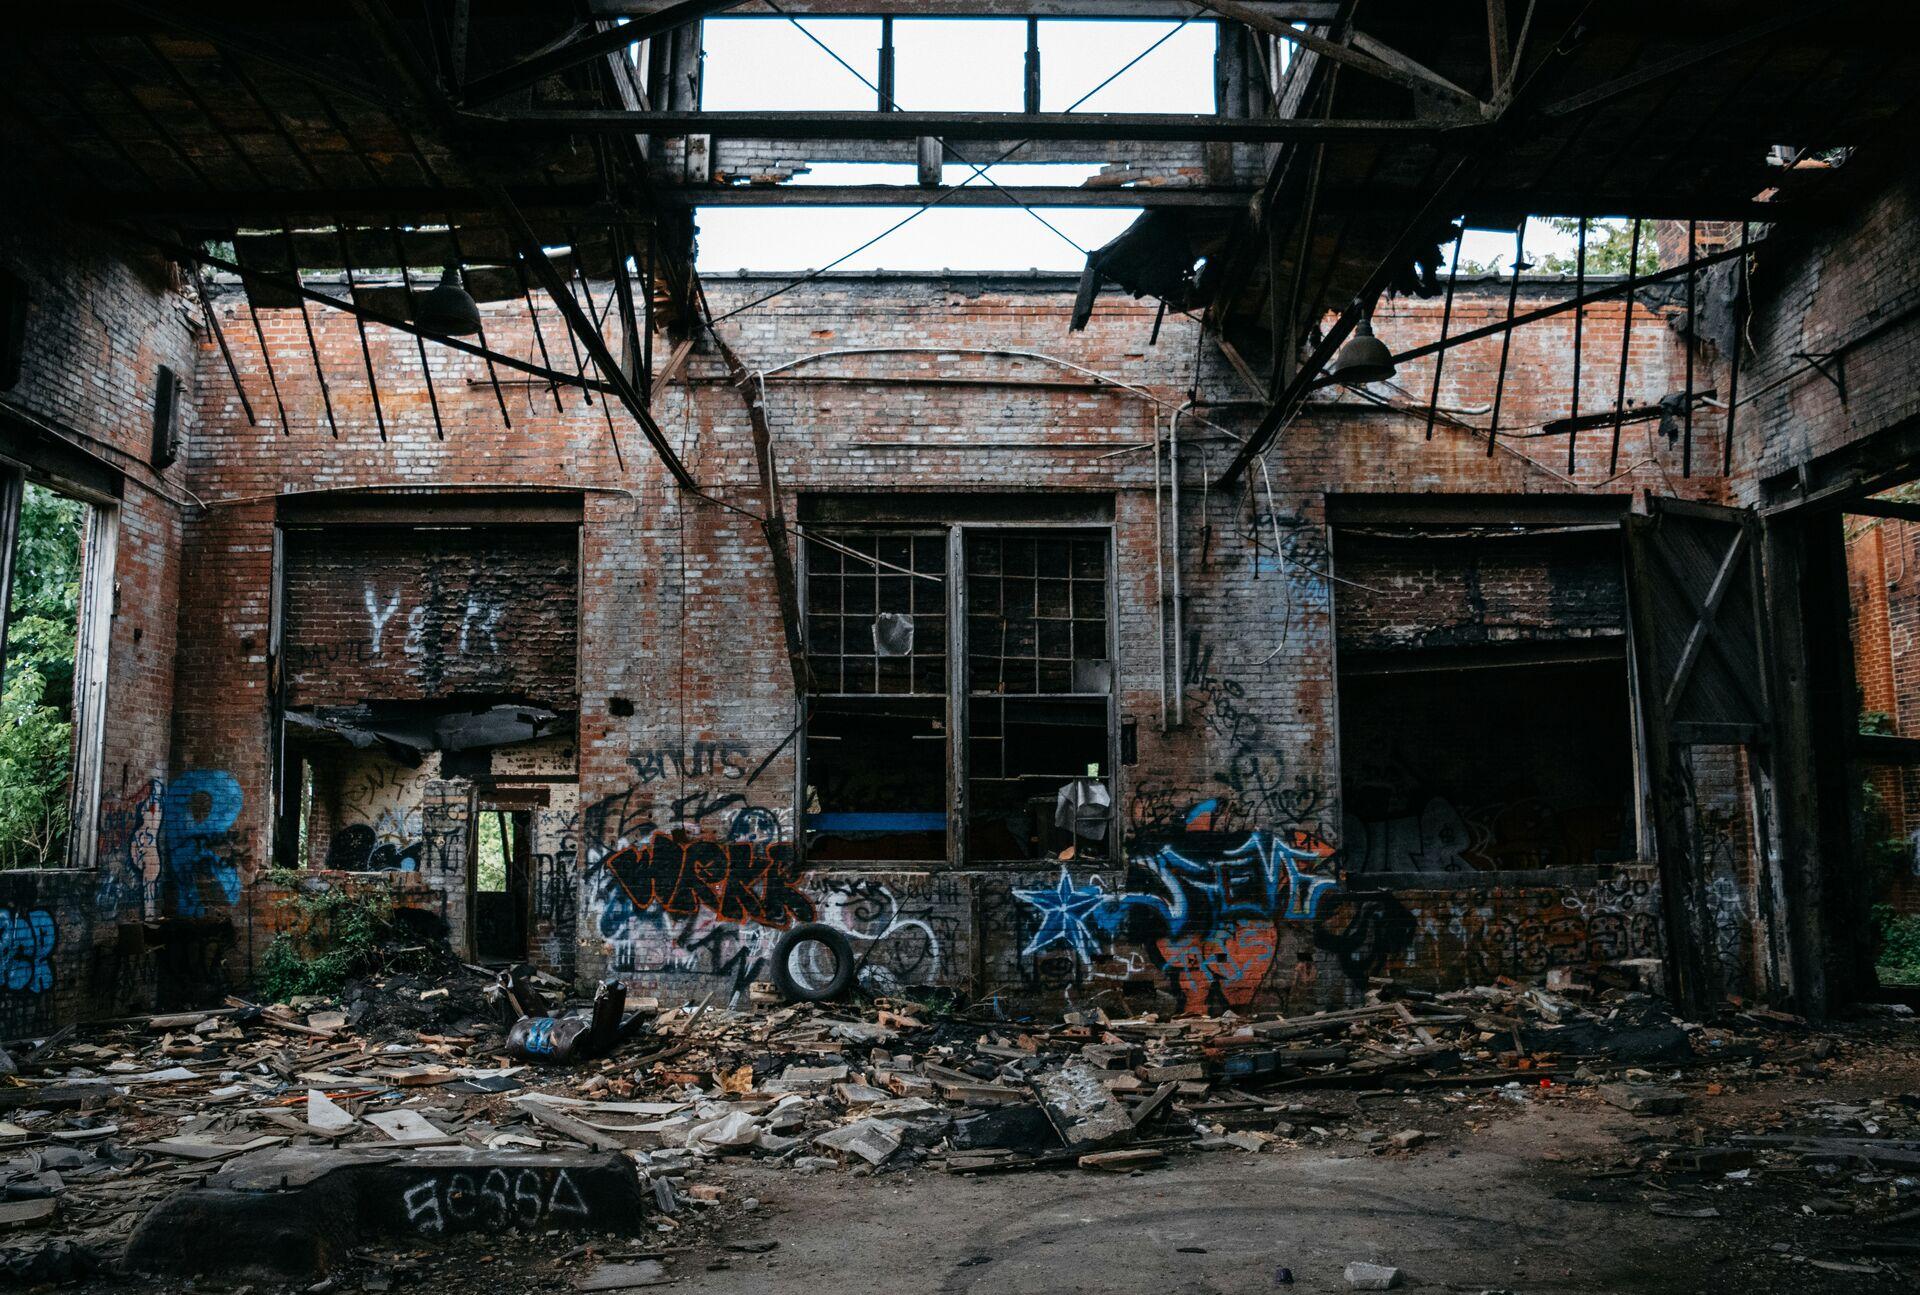 The dilapidated interior of a brick industrial building with graffiti on the walls and rubble on the ground